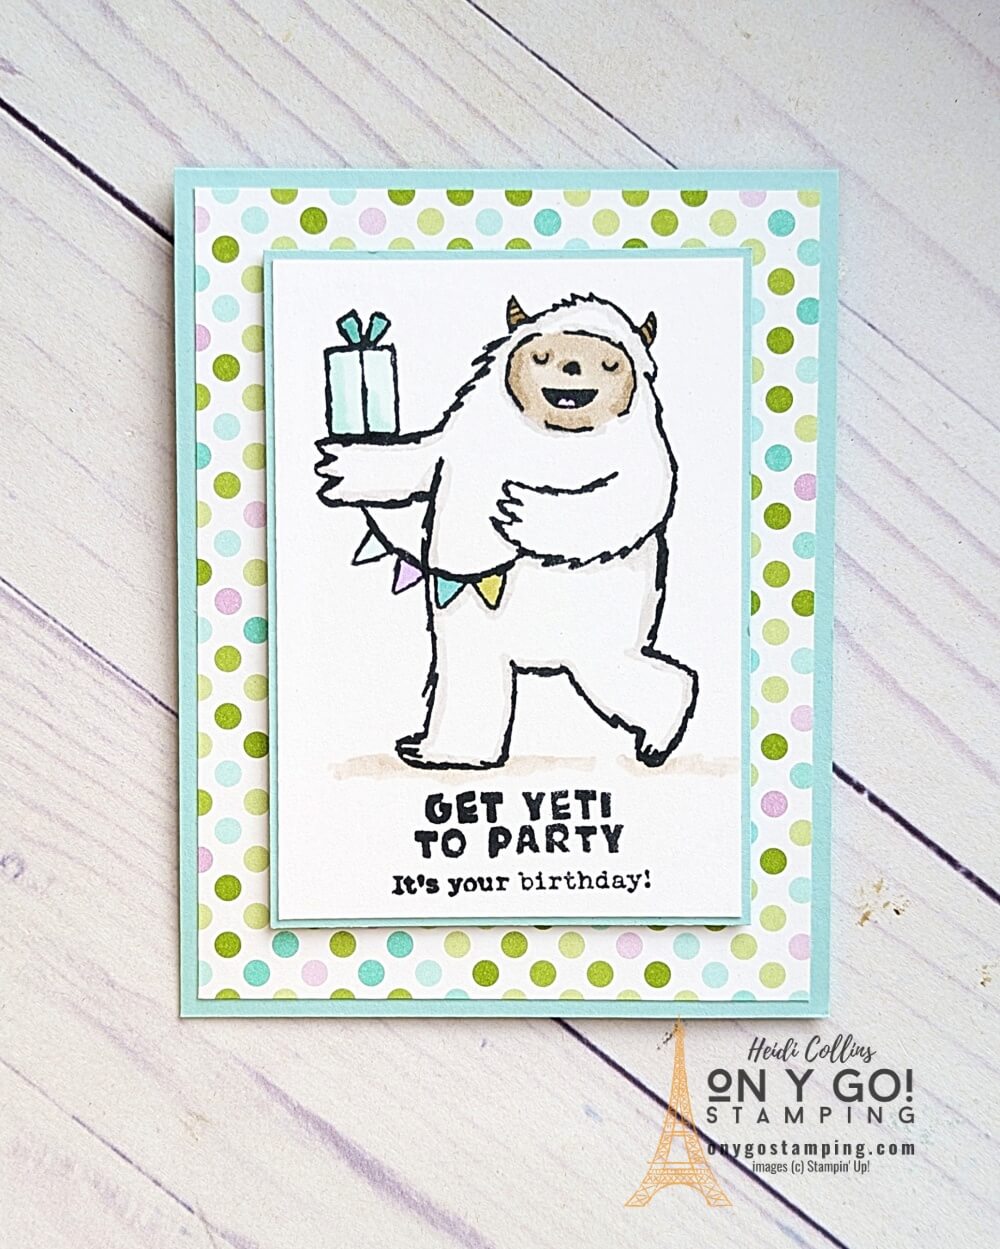 Use the Yeti to Party stamp set from Stampin' Up! to create a handmade birthday card. This yeti is definitely ready to party!